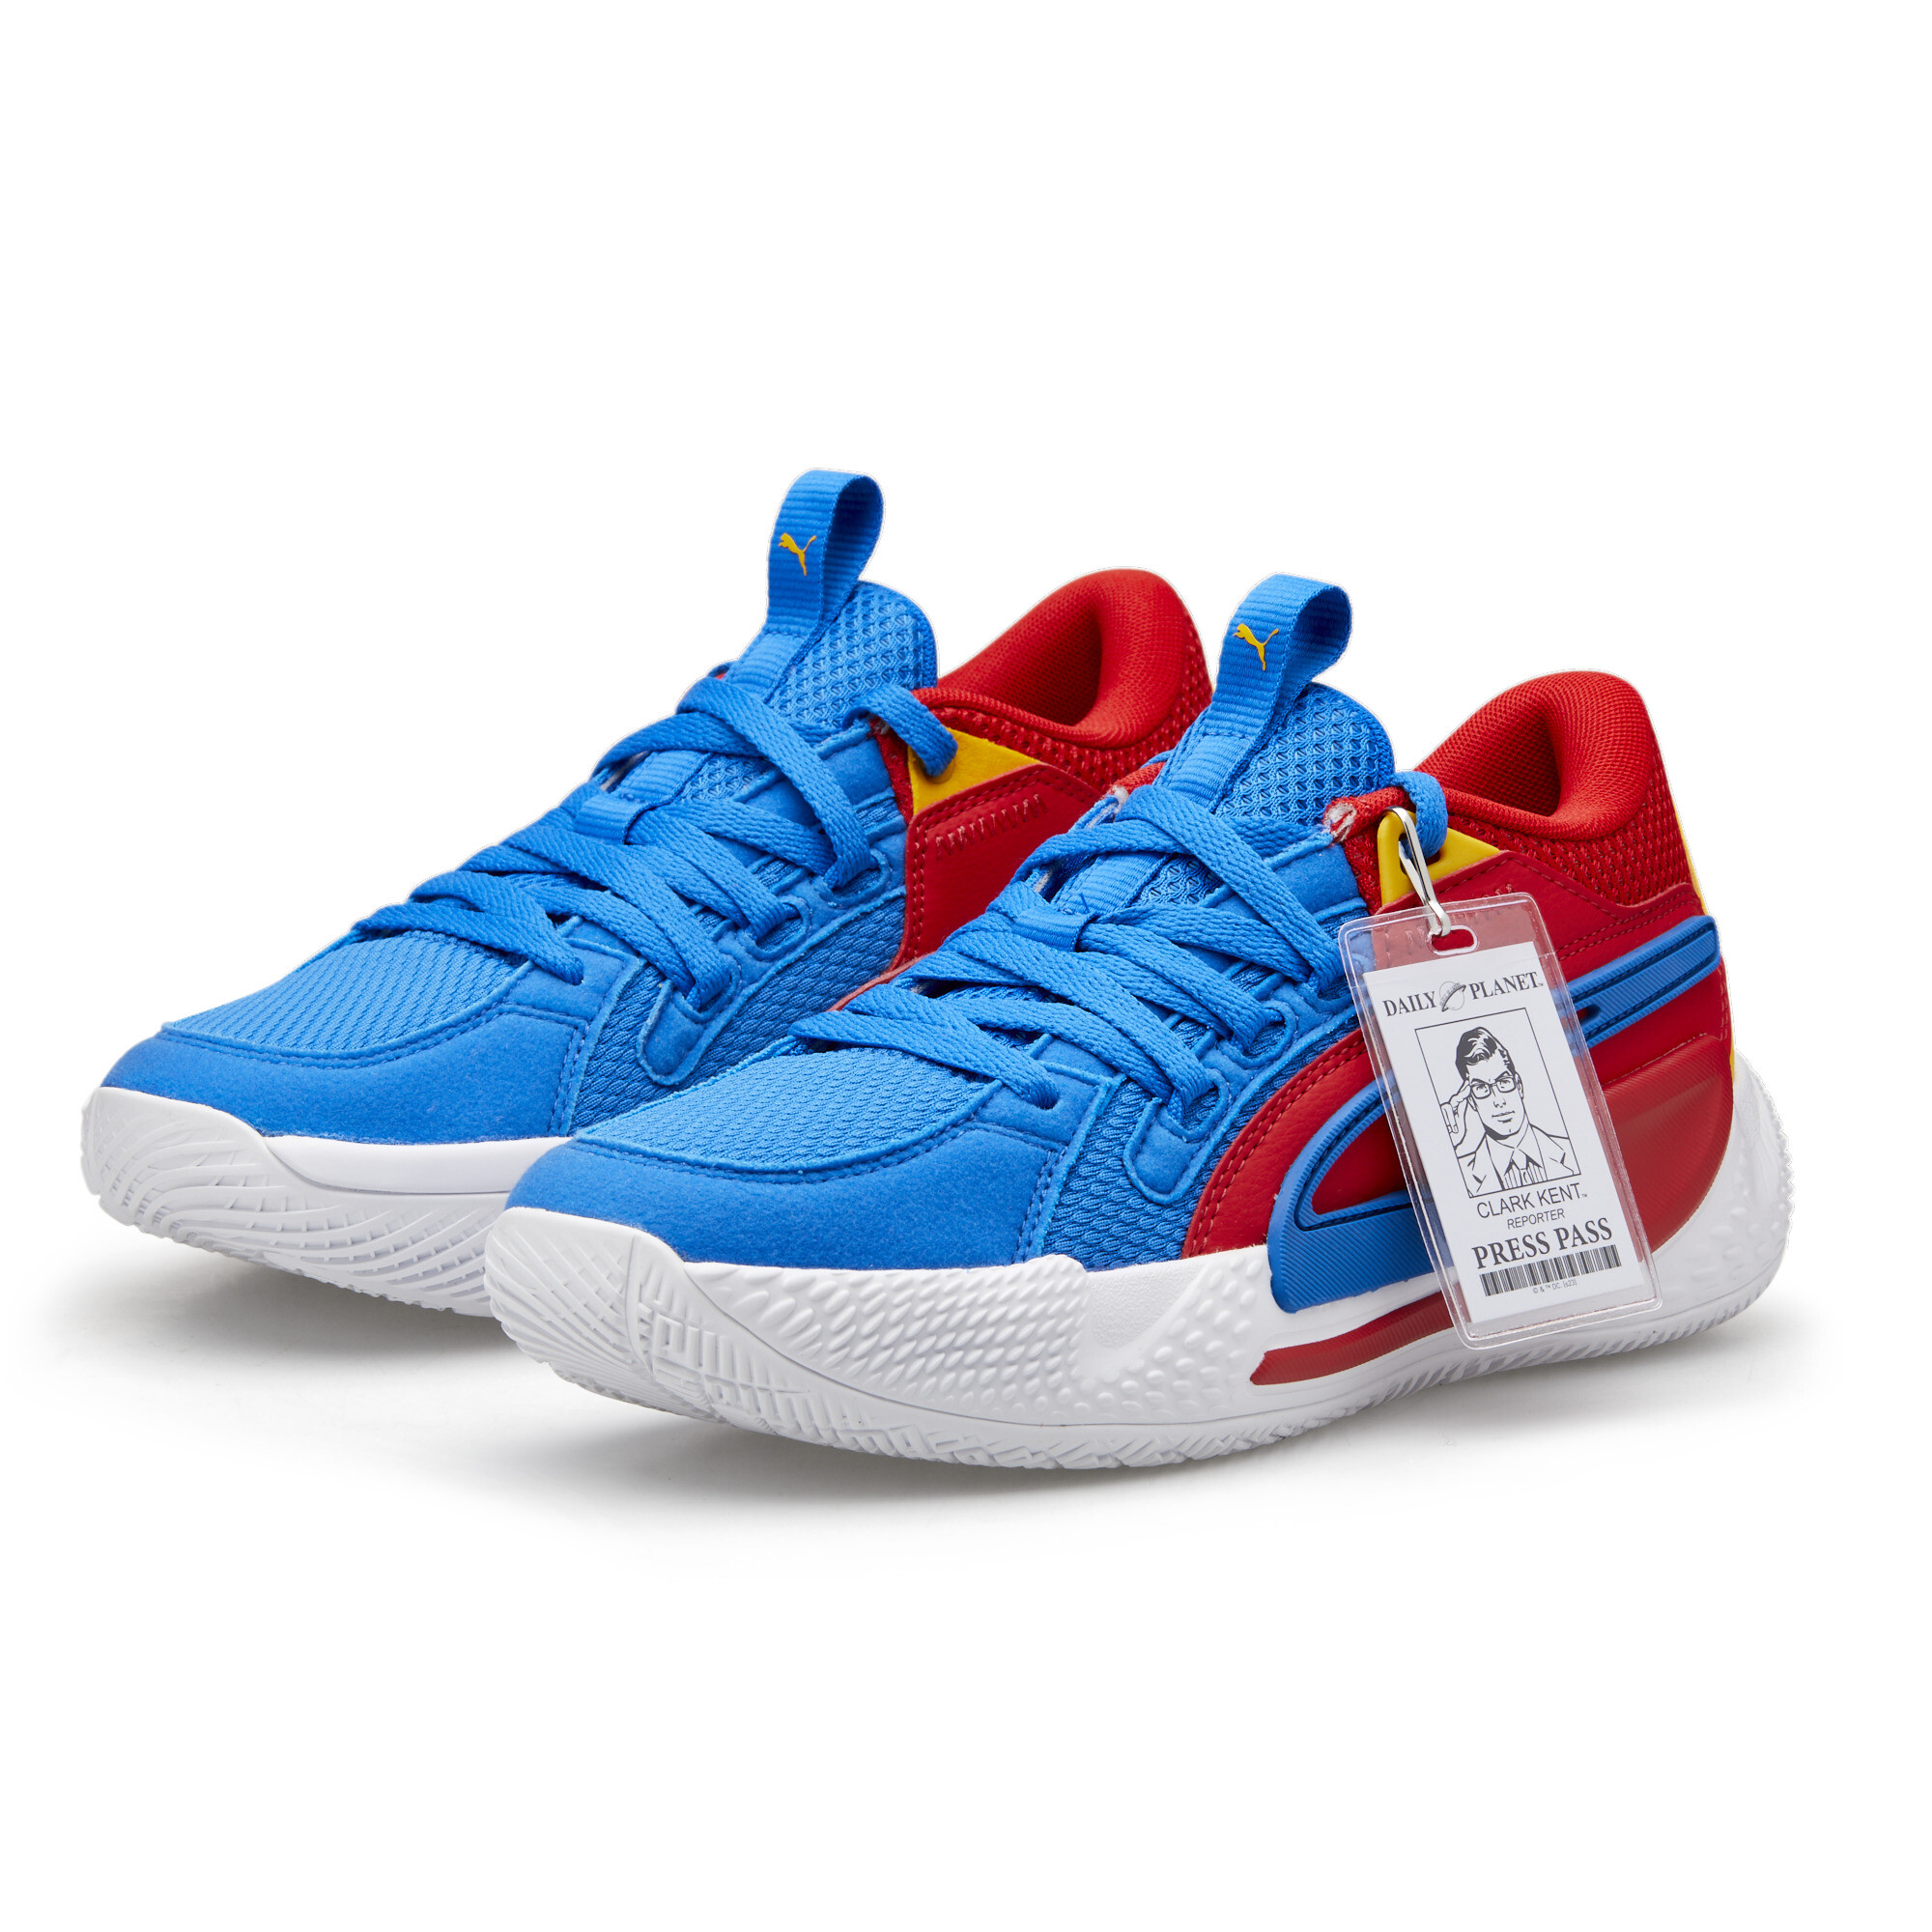 ڥס޸Ρ ס  PUMA x ѡޥ 85ǯ  ȥ饤 Хåȥܡ륷塼  Racing Blue-Yellow Sizzle-For All Time Red PUMA.com